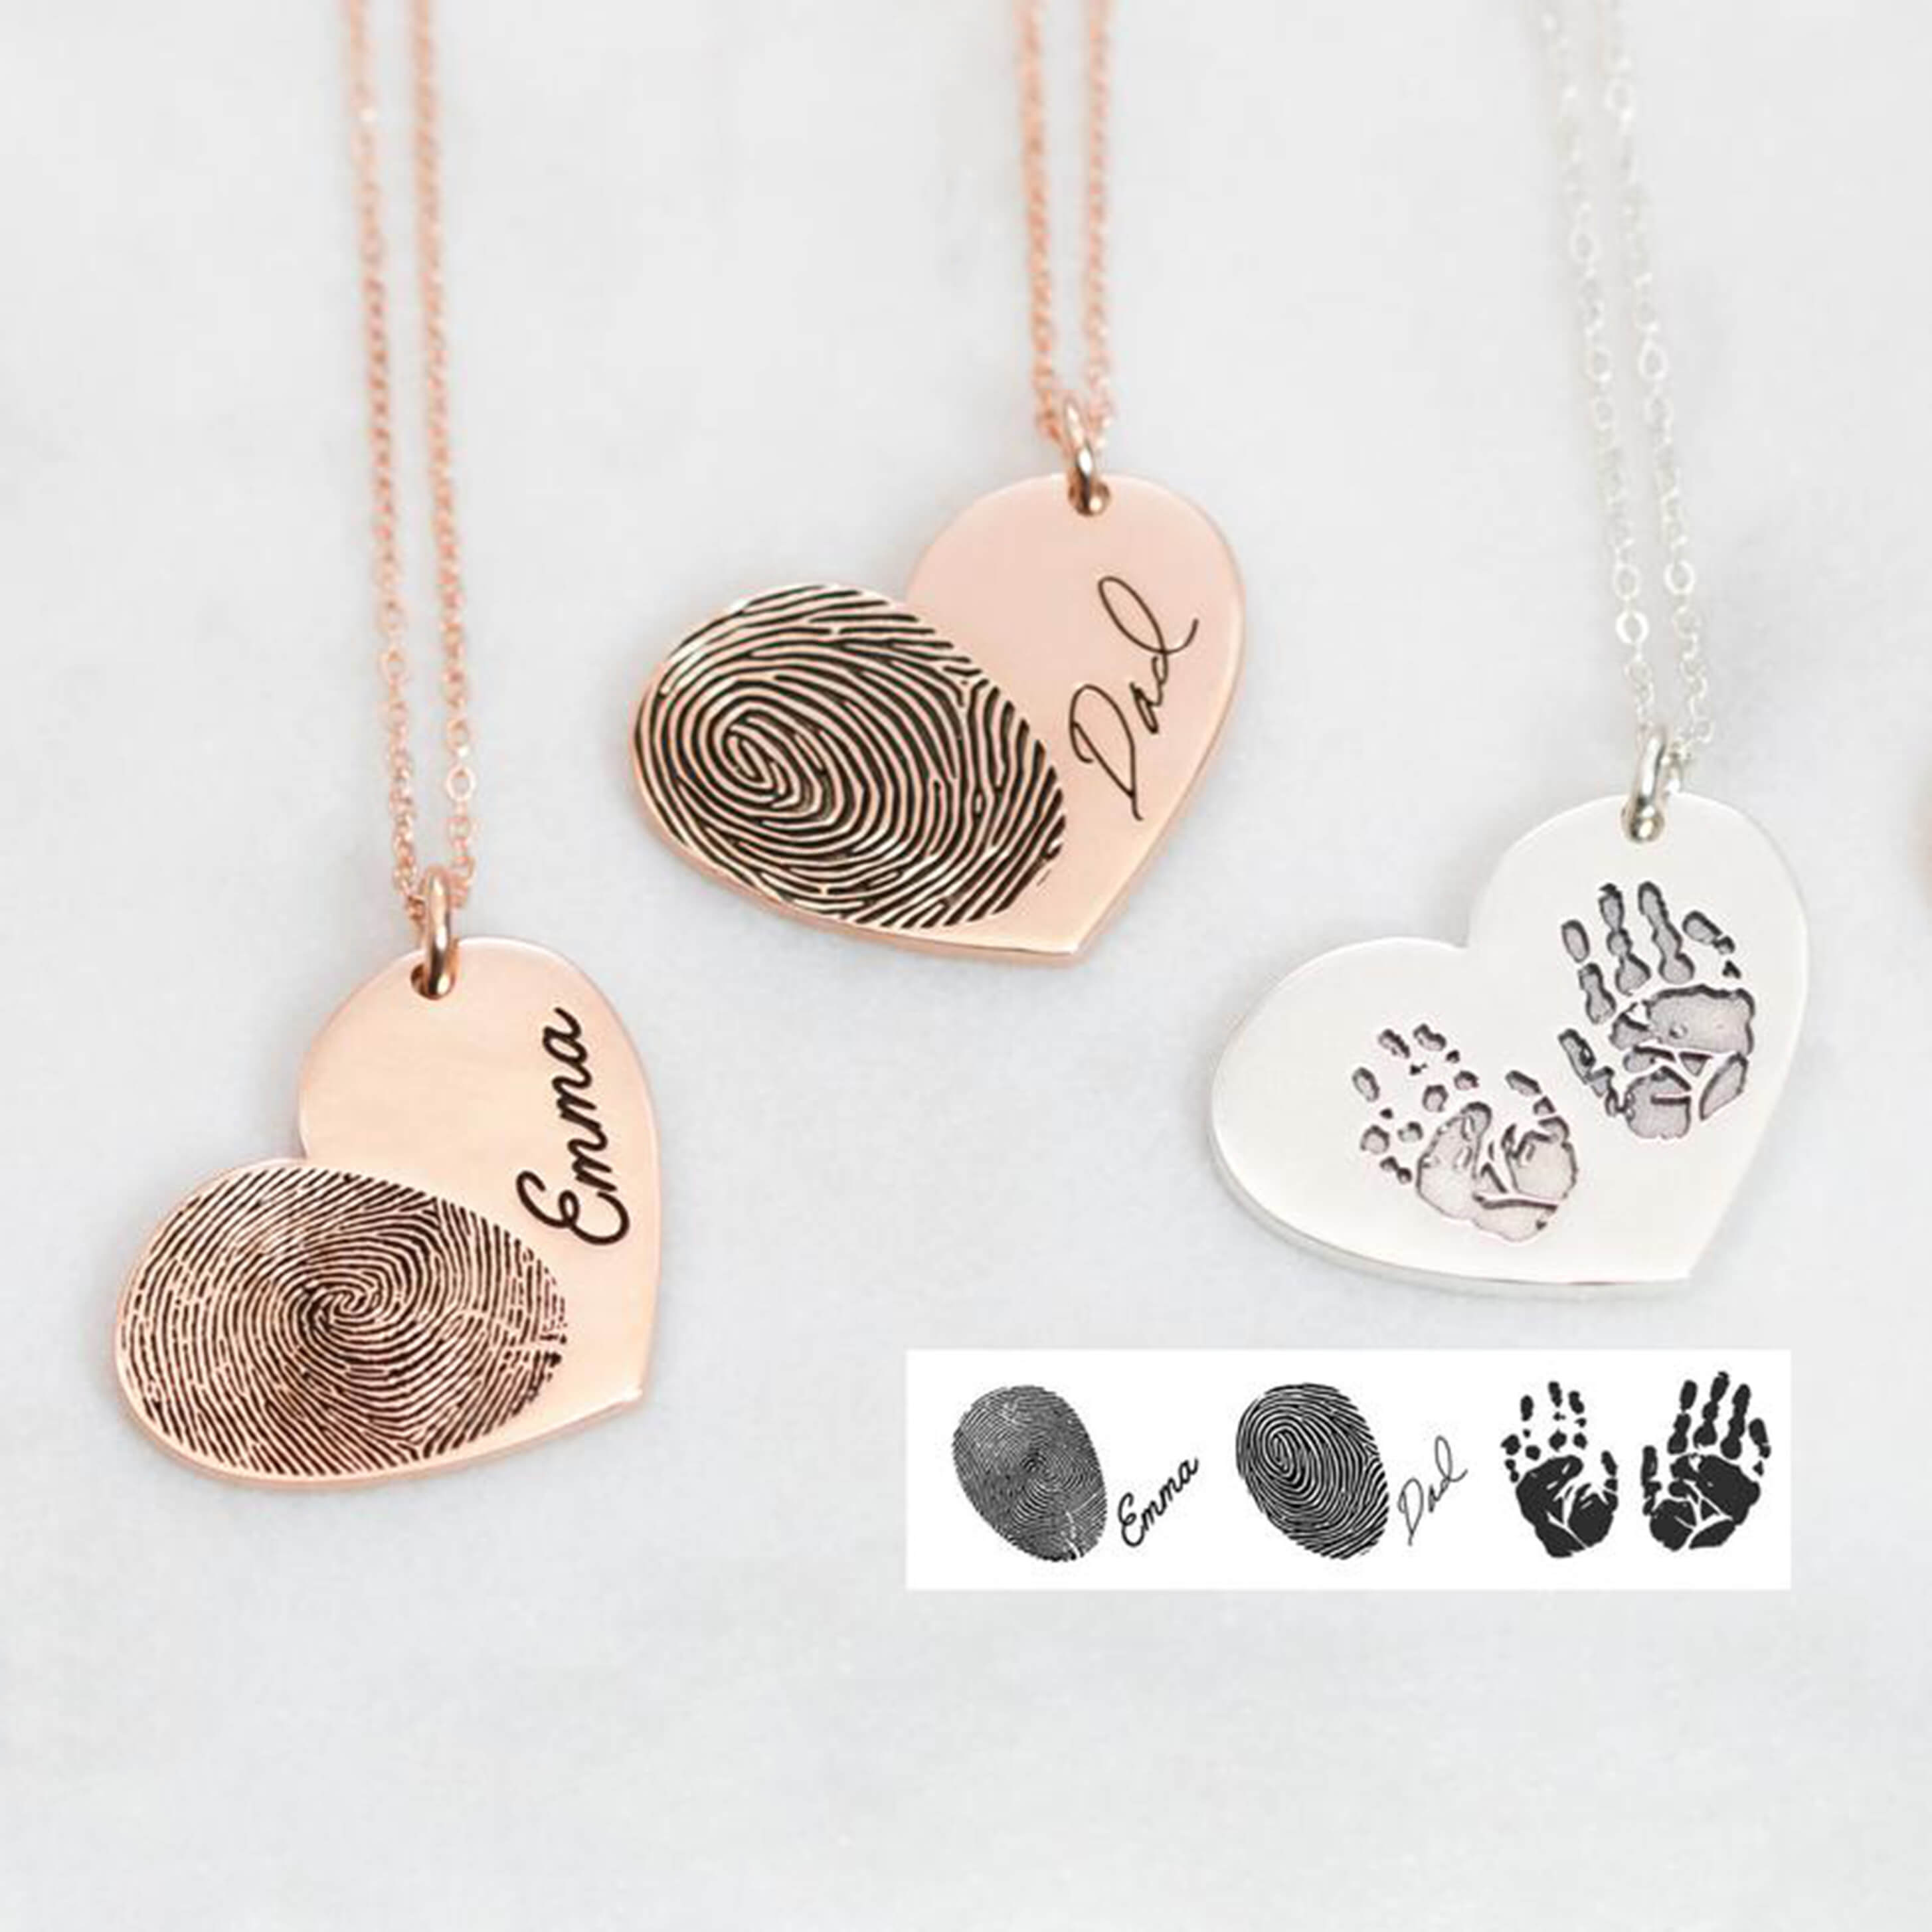 Buy Personalized Baby Footprint Charm Necklace Meaningful Gift For Woman  New Mom New Born Baby Miscarriage Memorial Present(Y,14